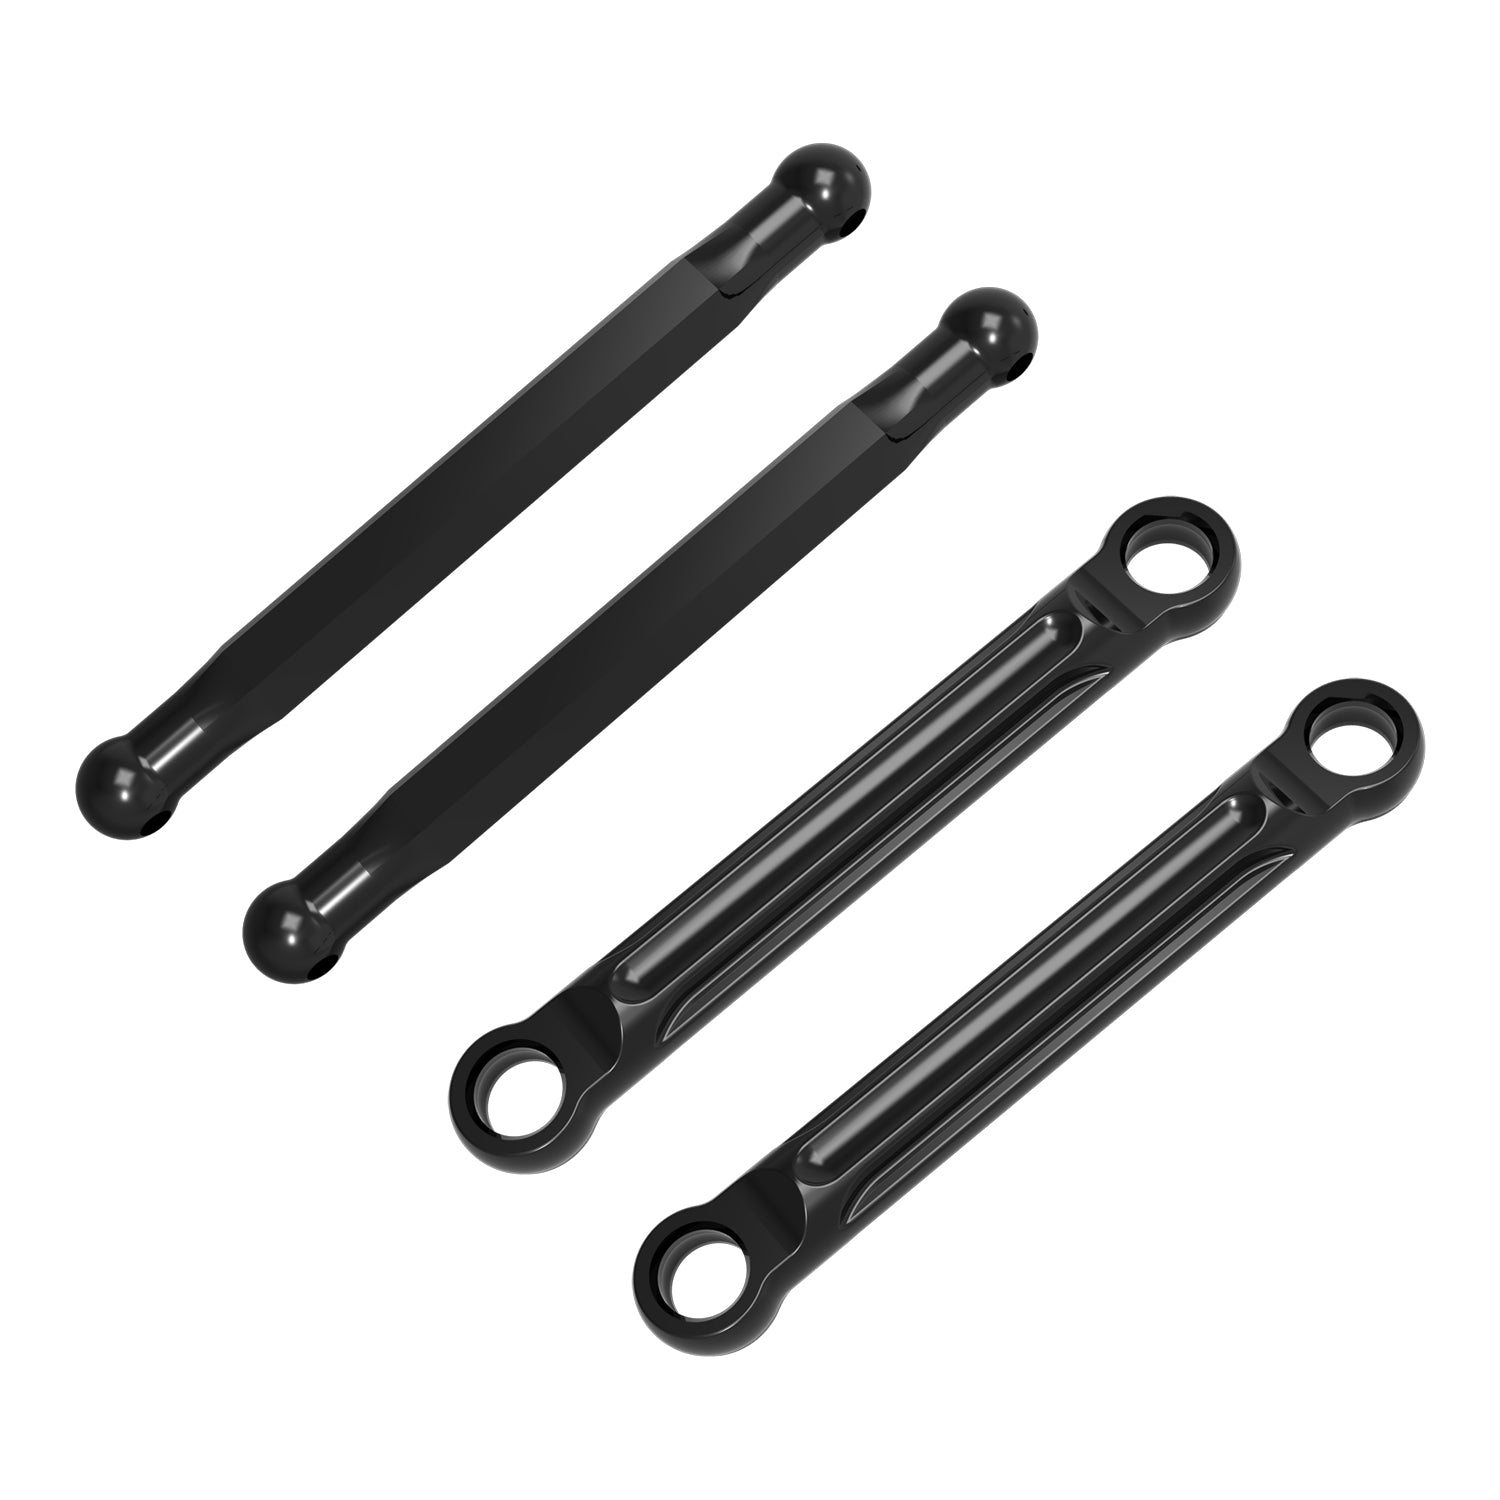 4PCs Steering Tie Rods for 1/16 Remote Control Truck Crossy / Sand Storm / Tornado